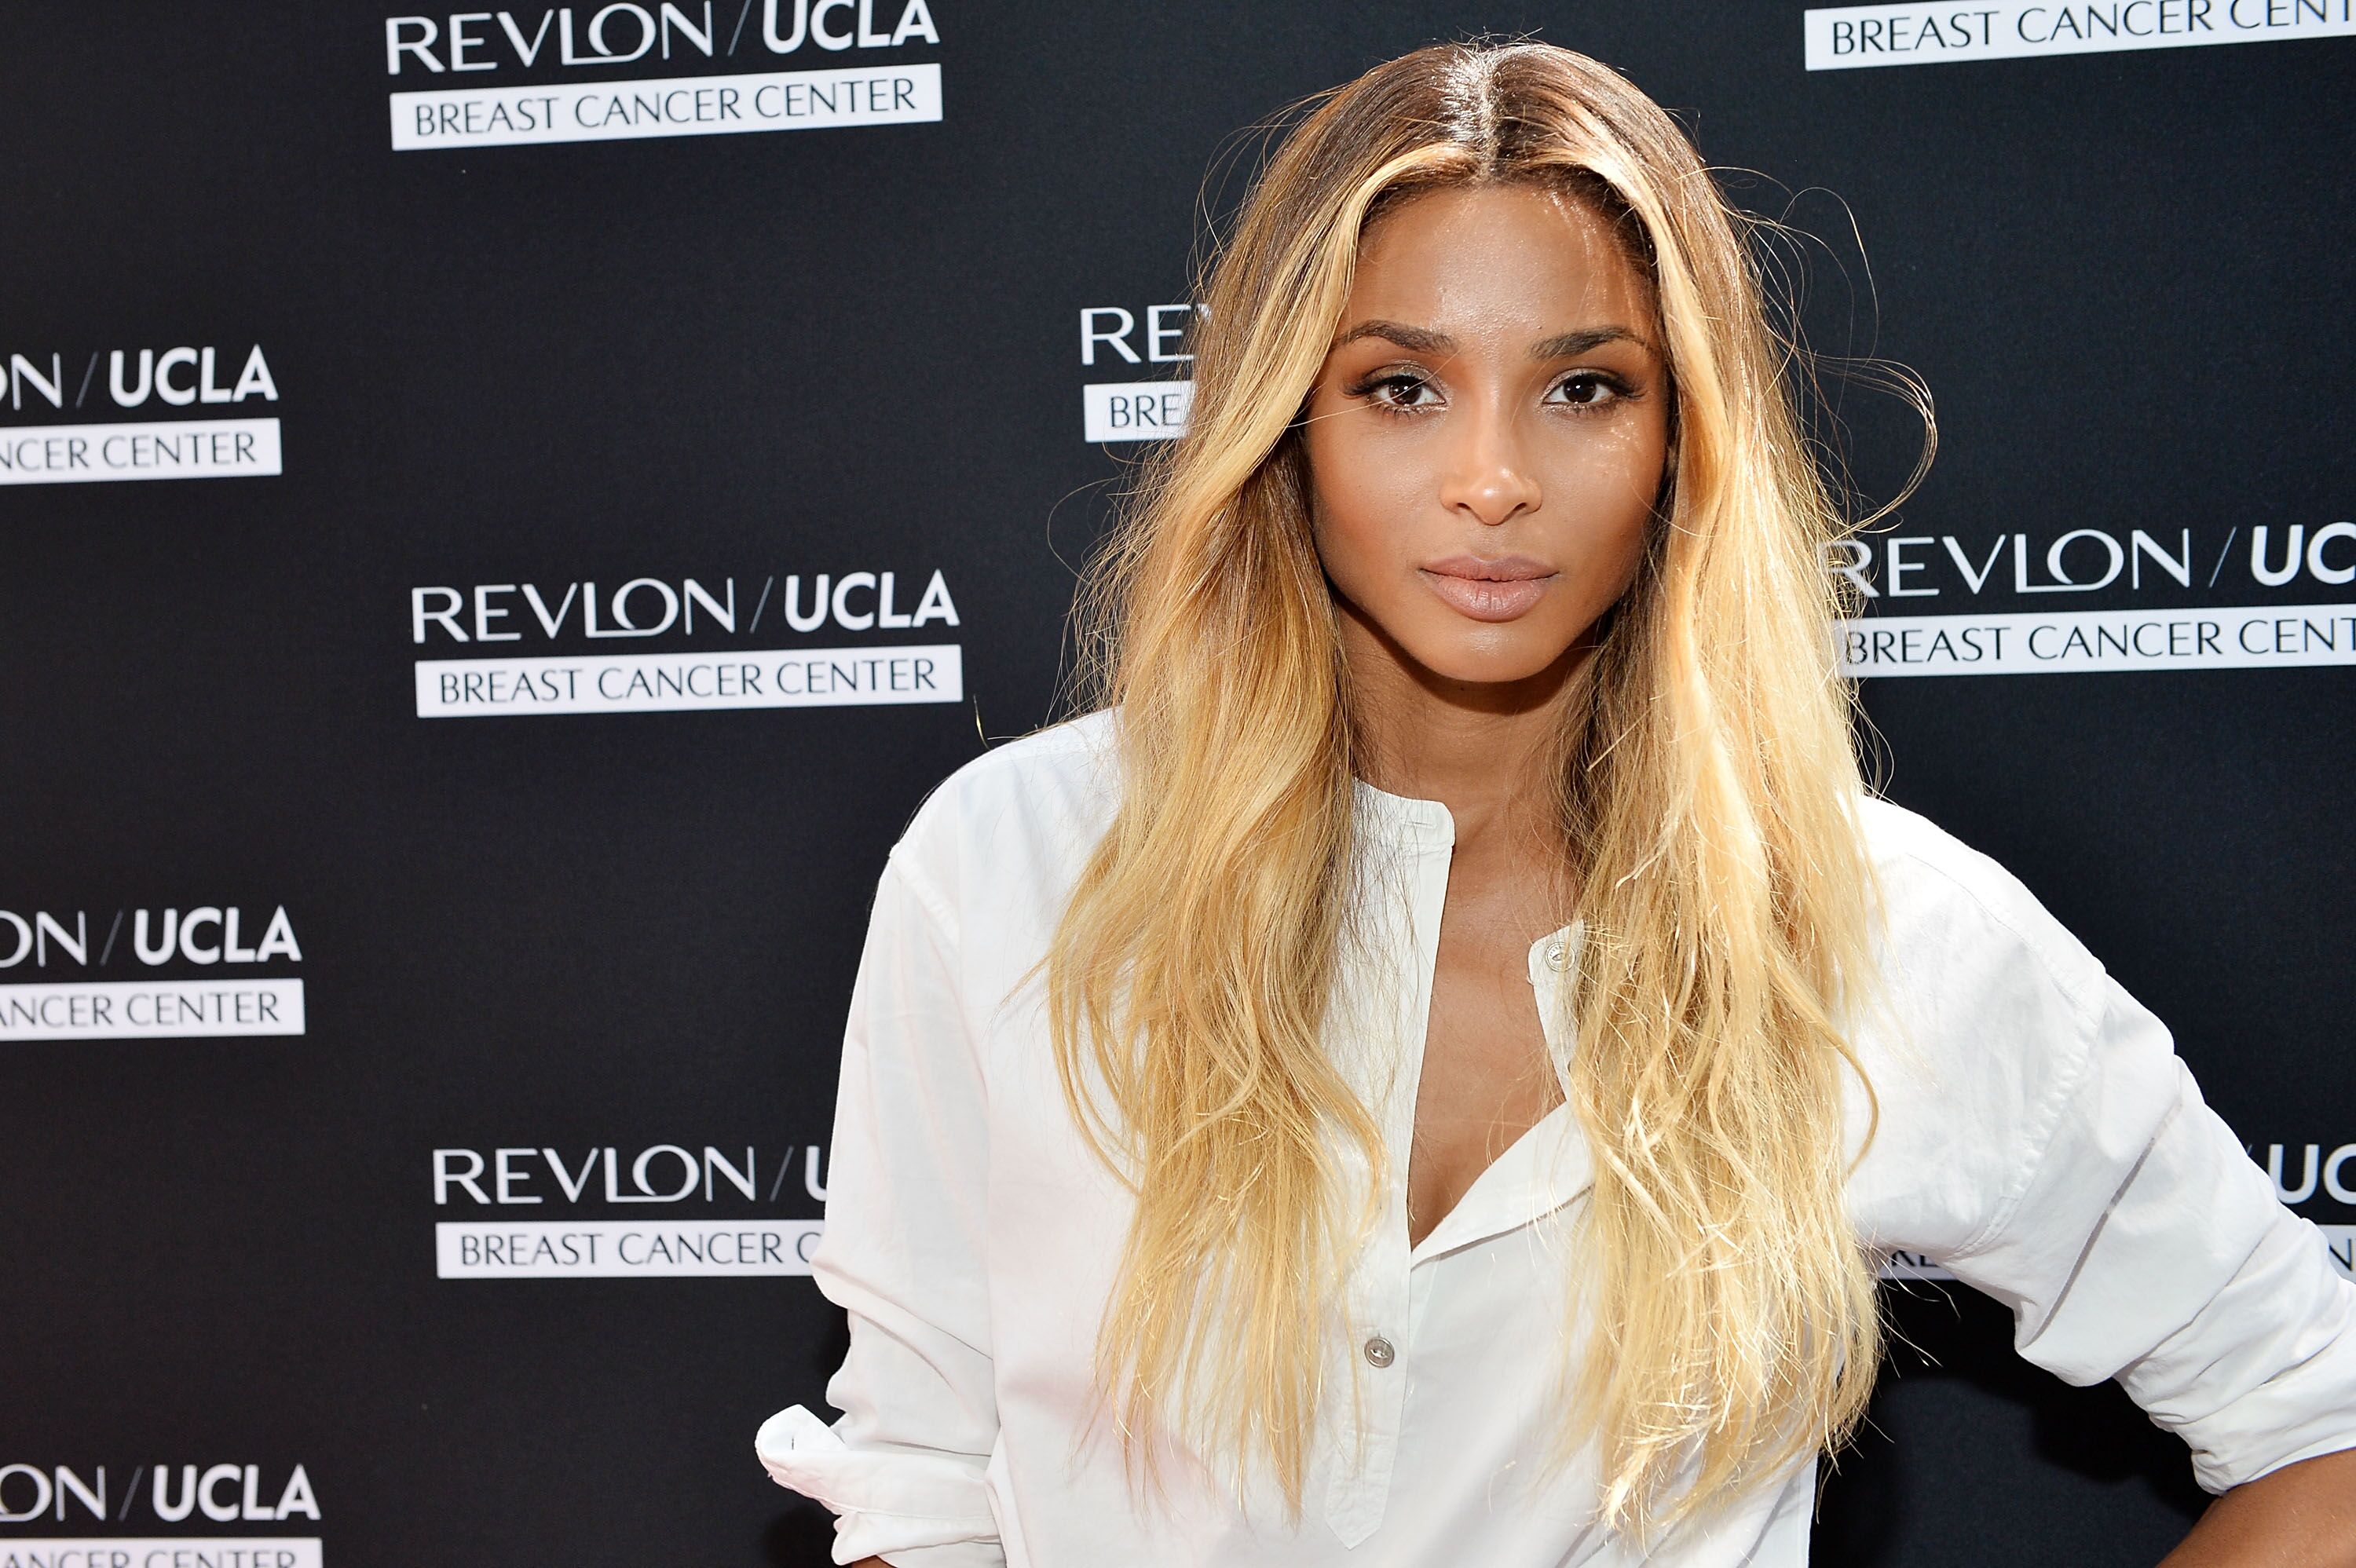 Ciara celebrates ground-breaking achievements in cancer research at Revlon's Annual Philanthropic Luncheon at the Chateau Marmont on September 27, 2016 in Los Angeles, California | Photo: Getty Images